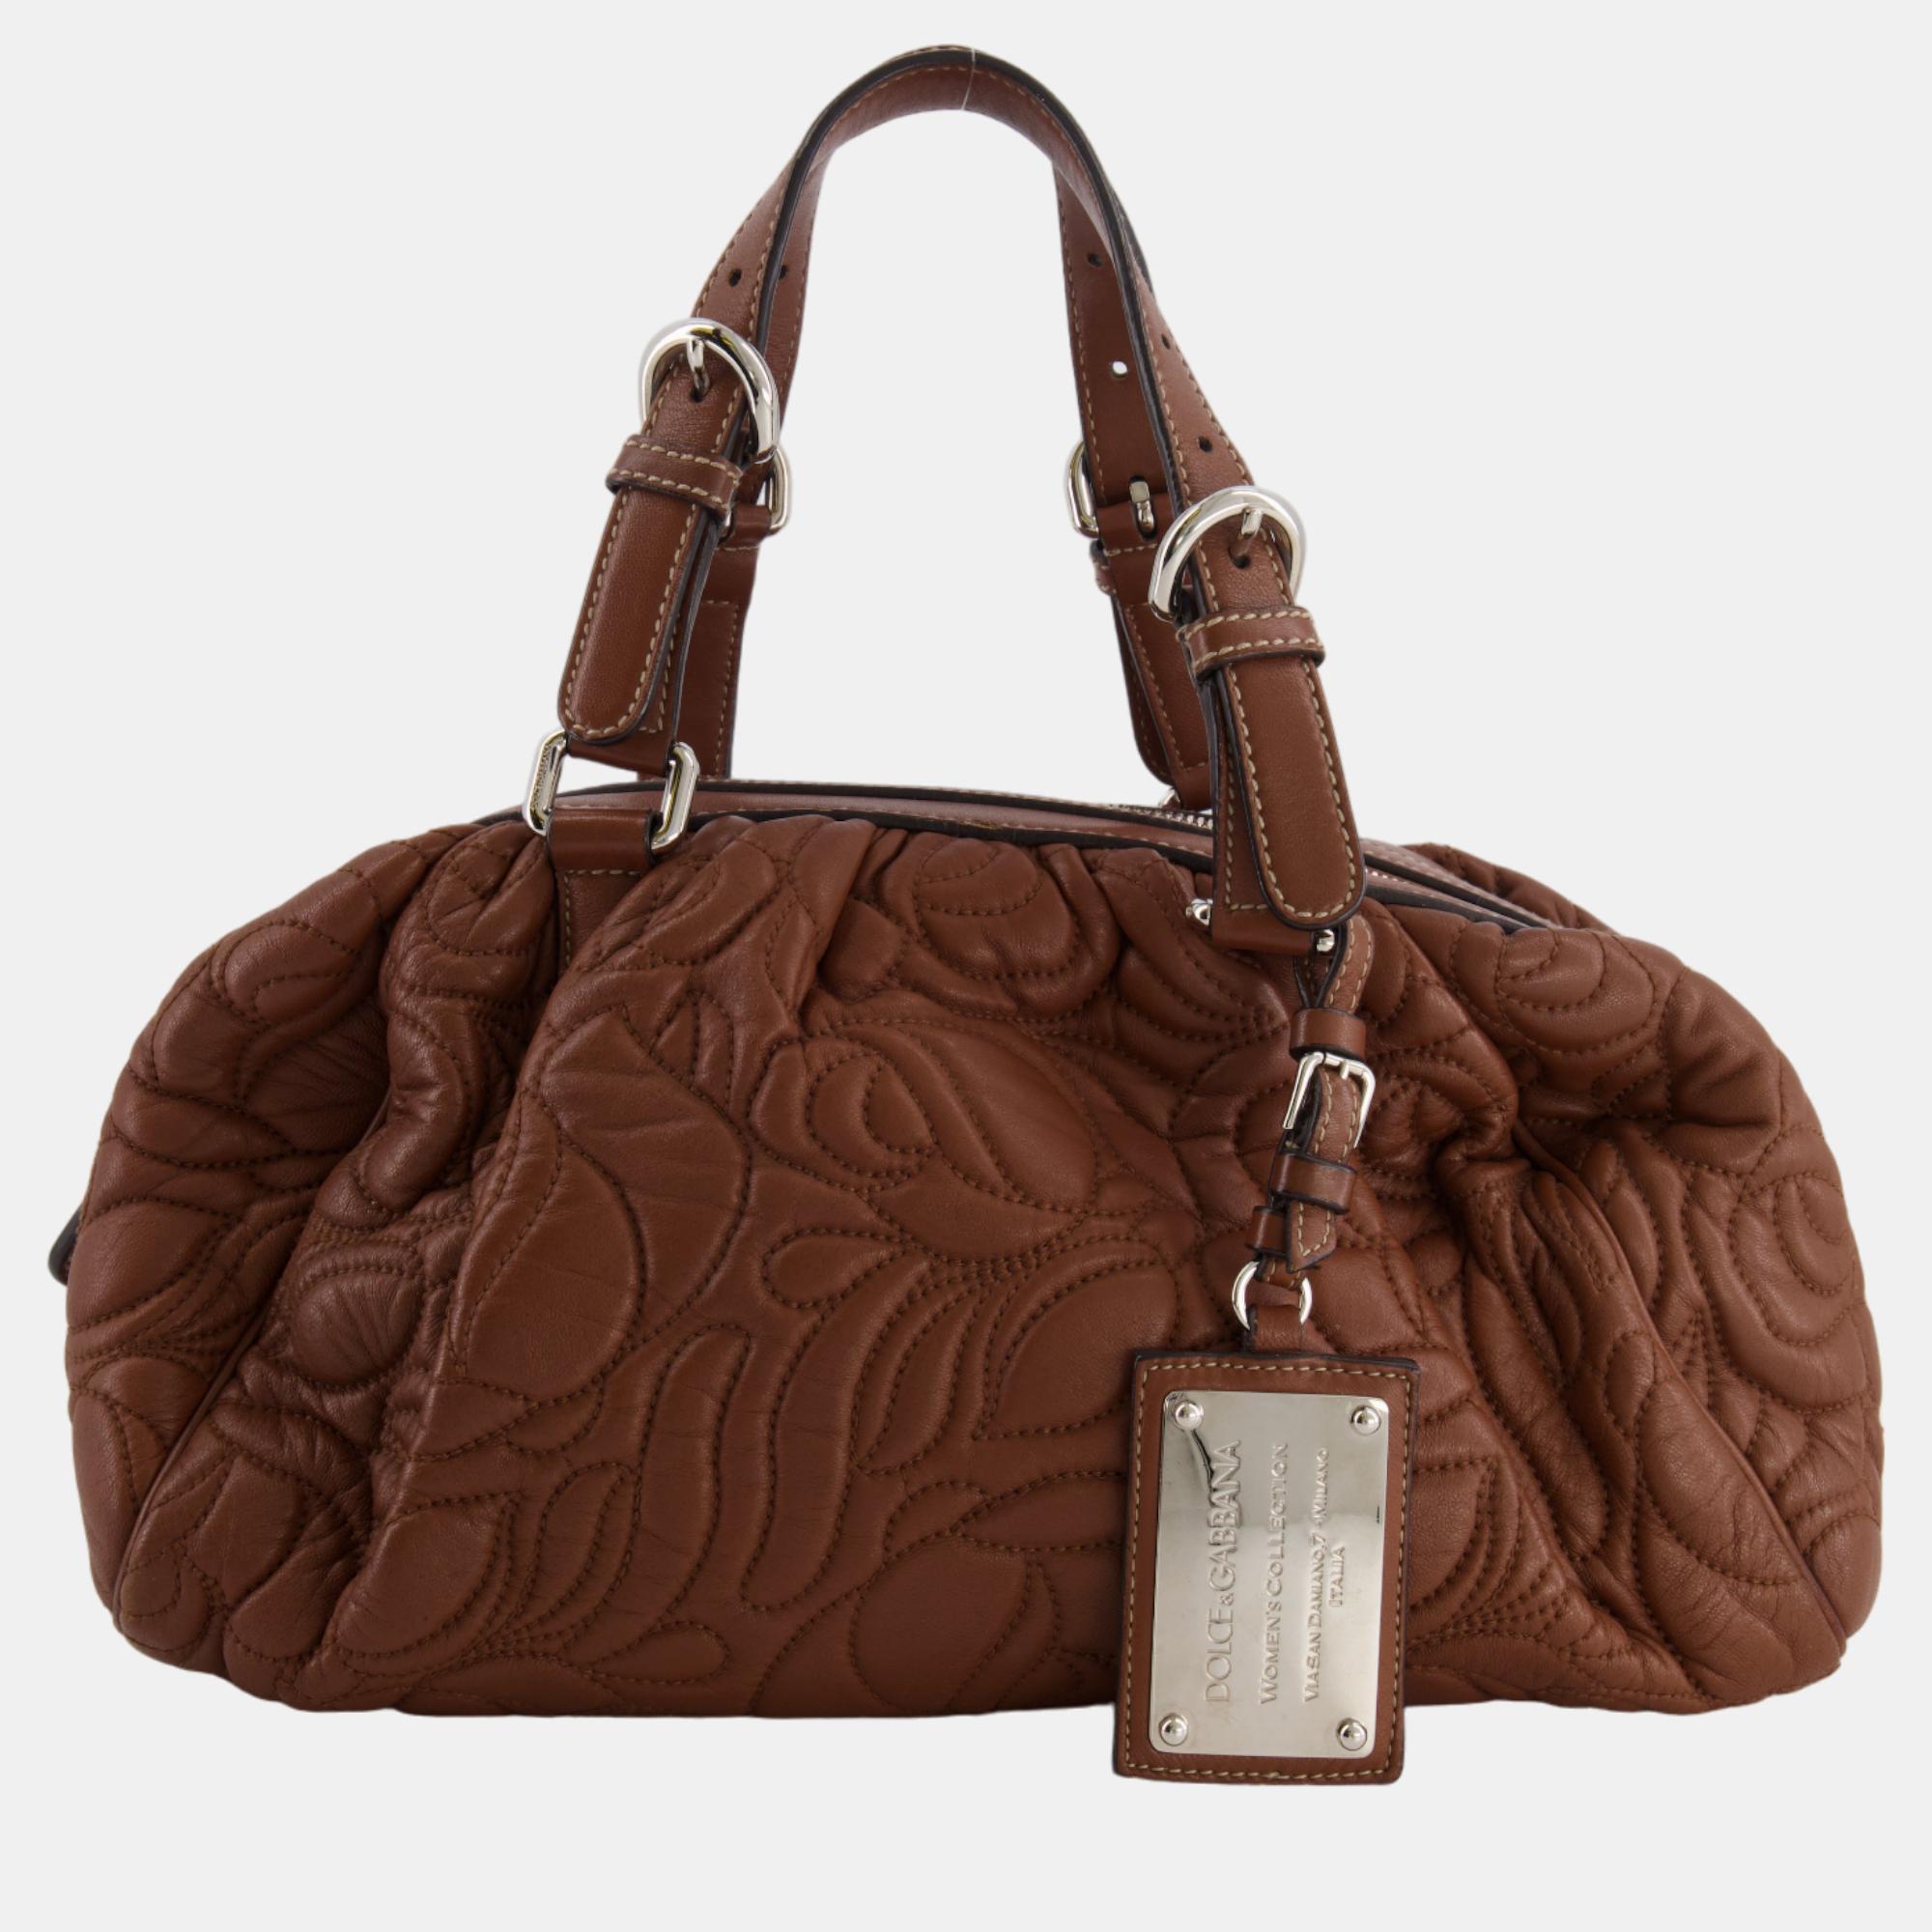 Dolce & Gabbana Brown Leather Bowling Bag With Silver Hardware